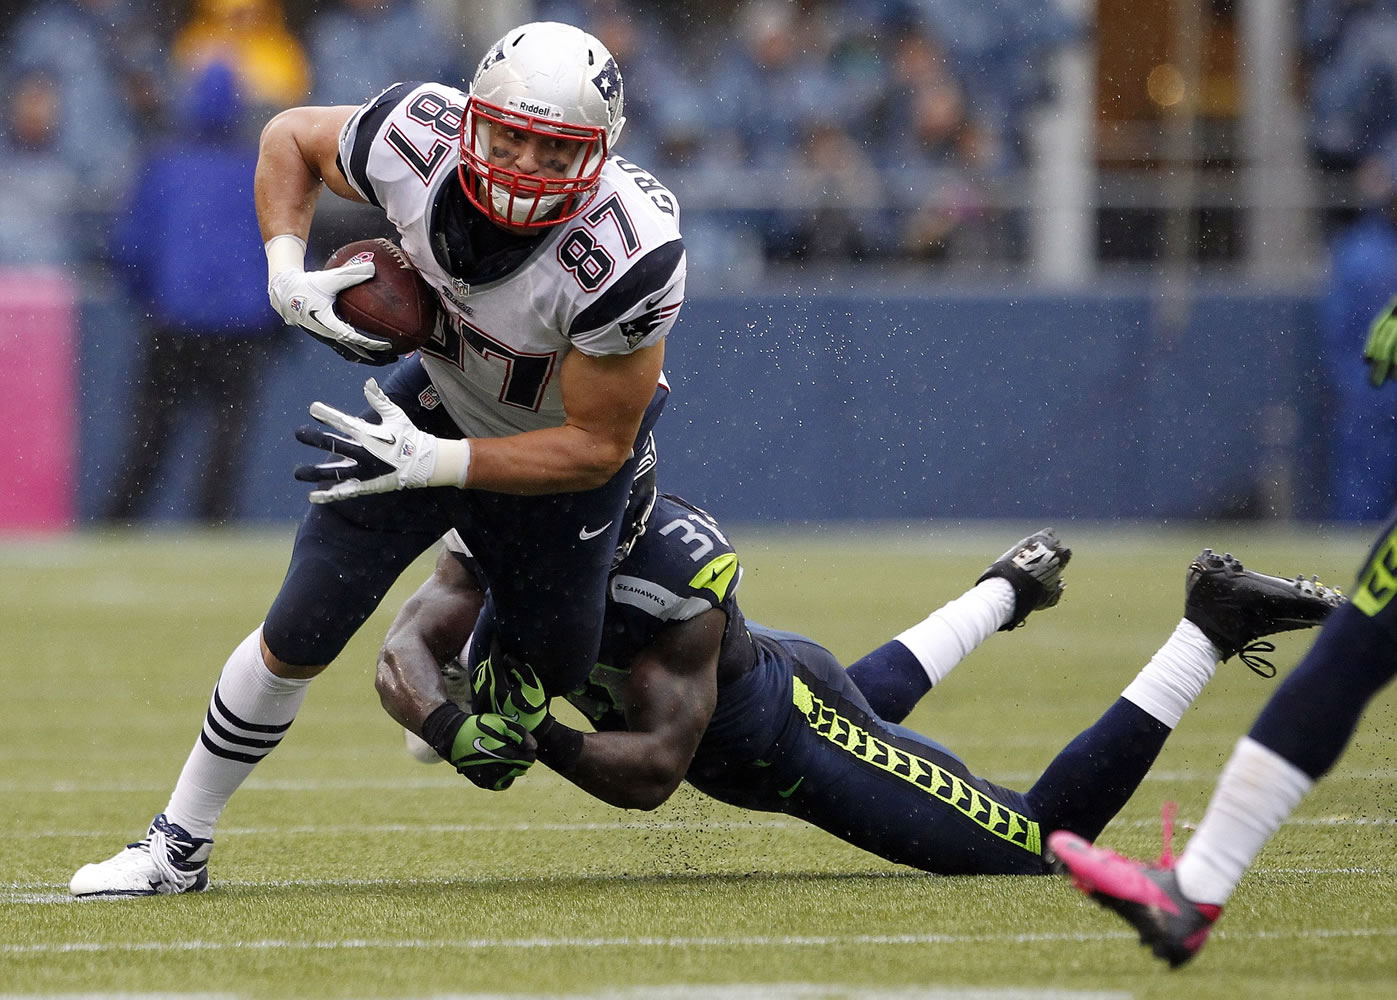 New England Patriots' Rob Gronkowski (87) is tackled by Seattle Seahawks' Kam Chancellor during a game played on Oct. 14, 2012.